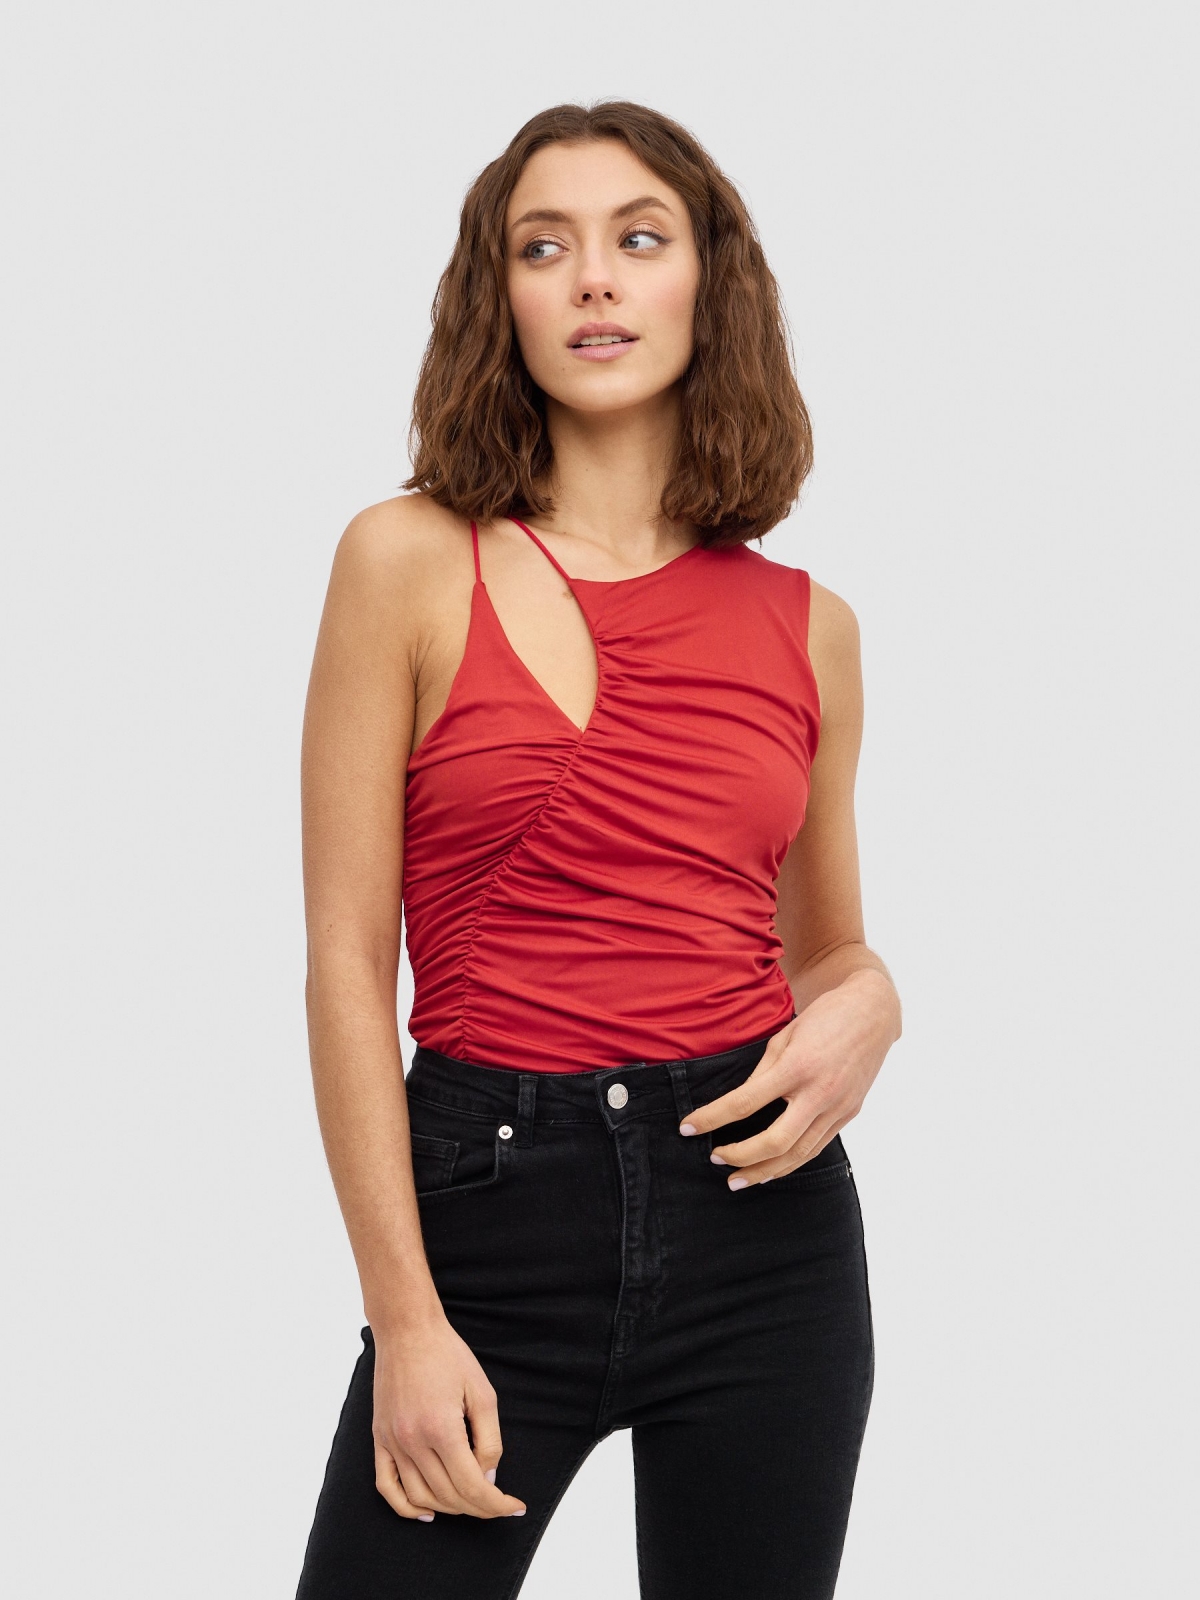 Cut out neck top red middle front view